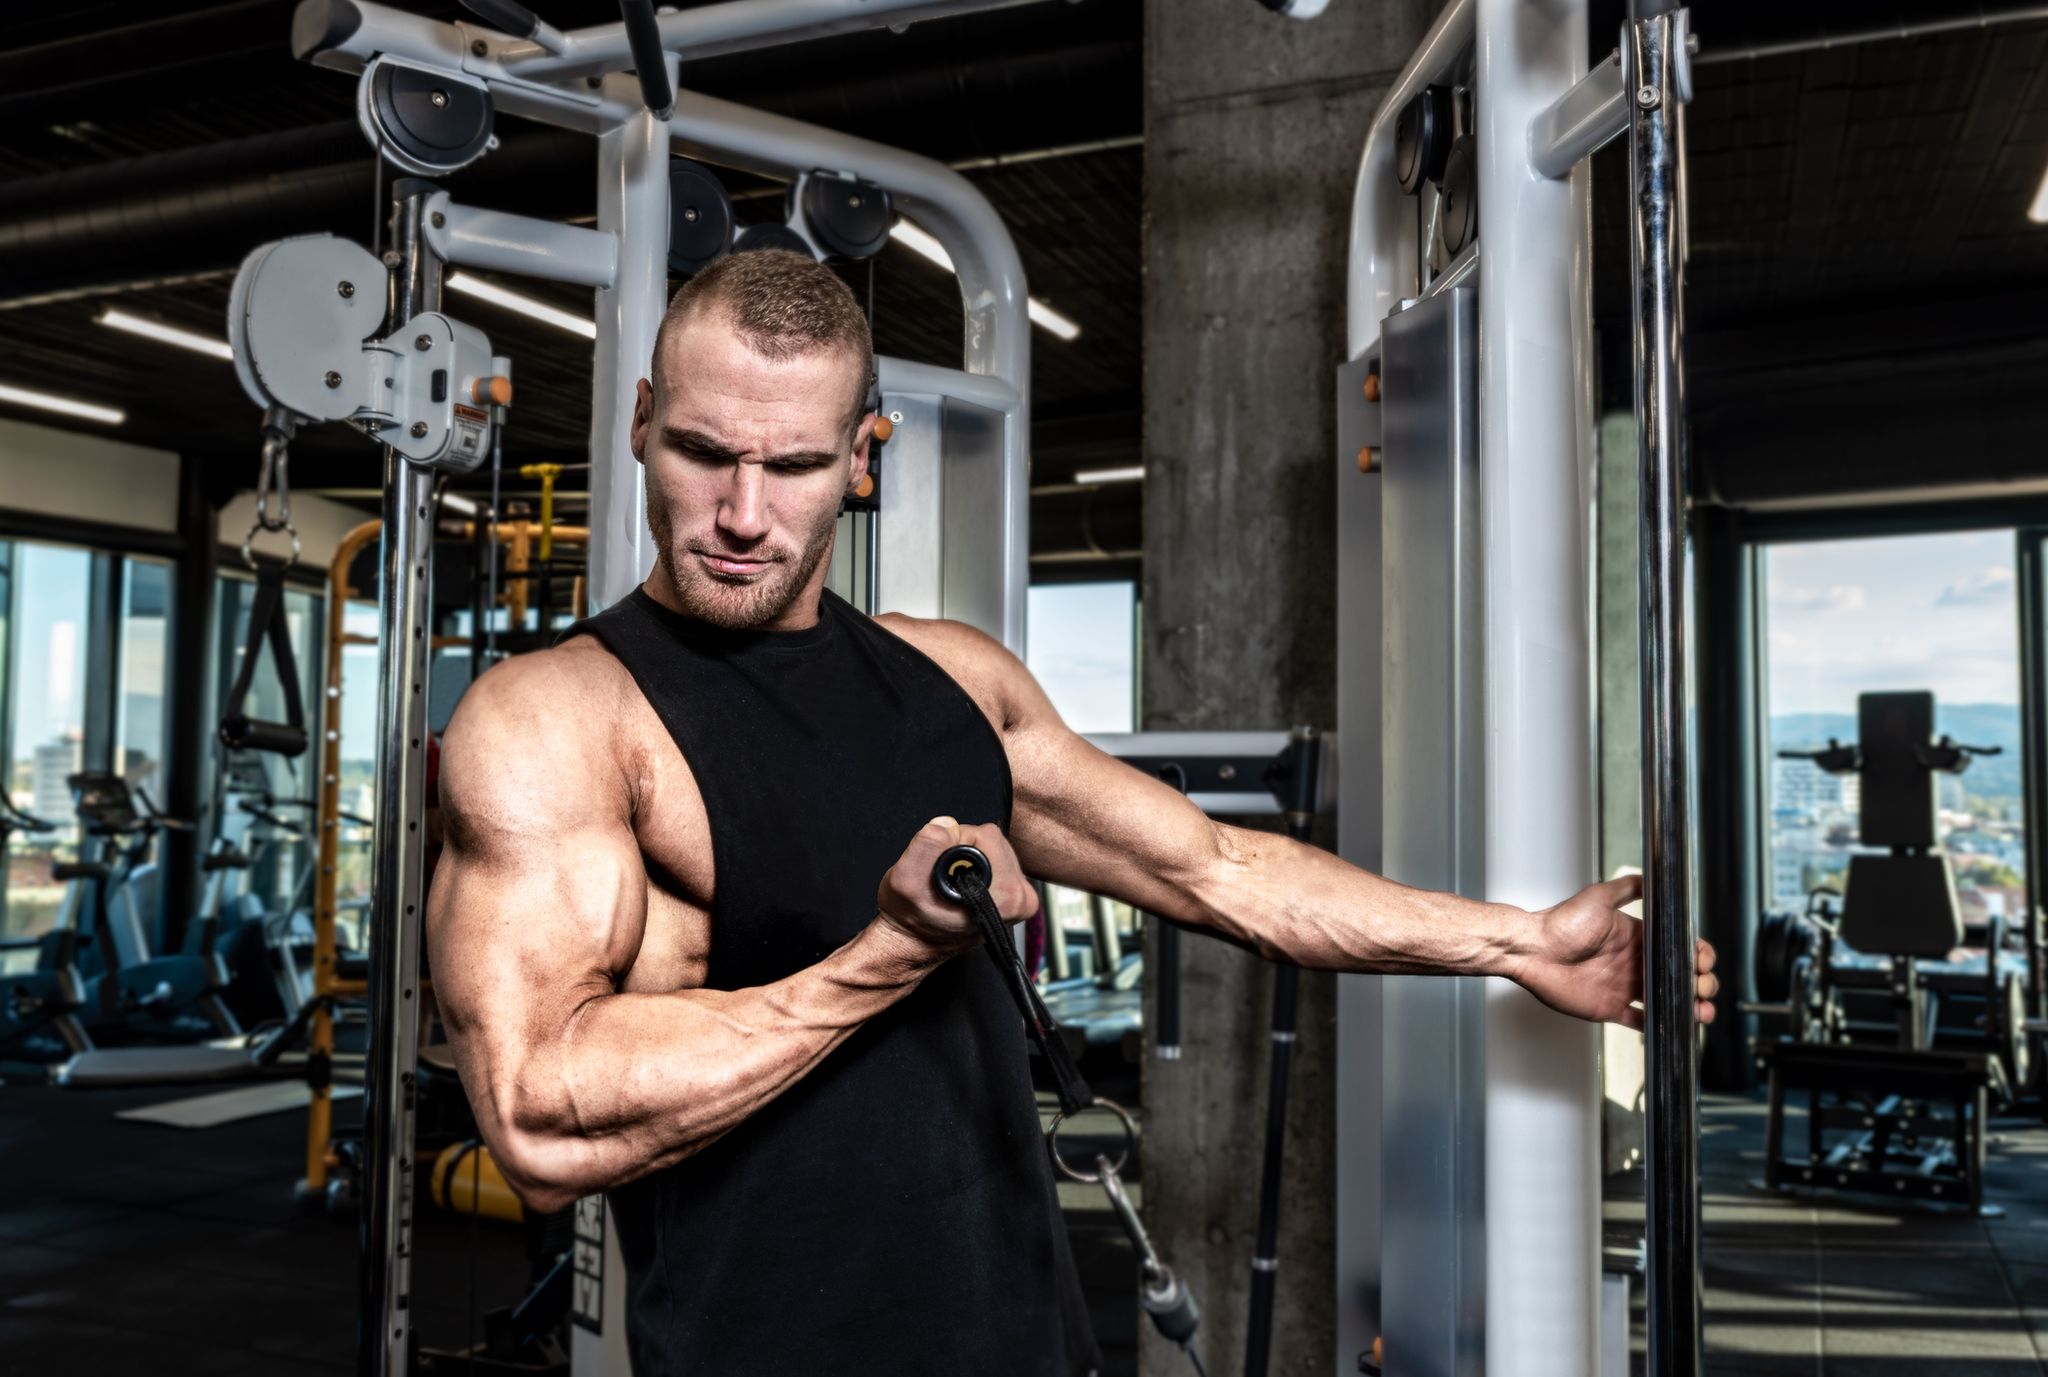 The Arm Workouts You Need to Build Bigger Biceps and Triceps